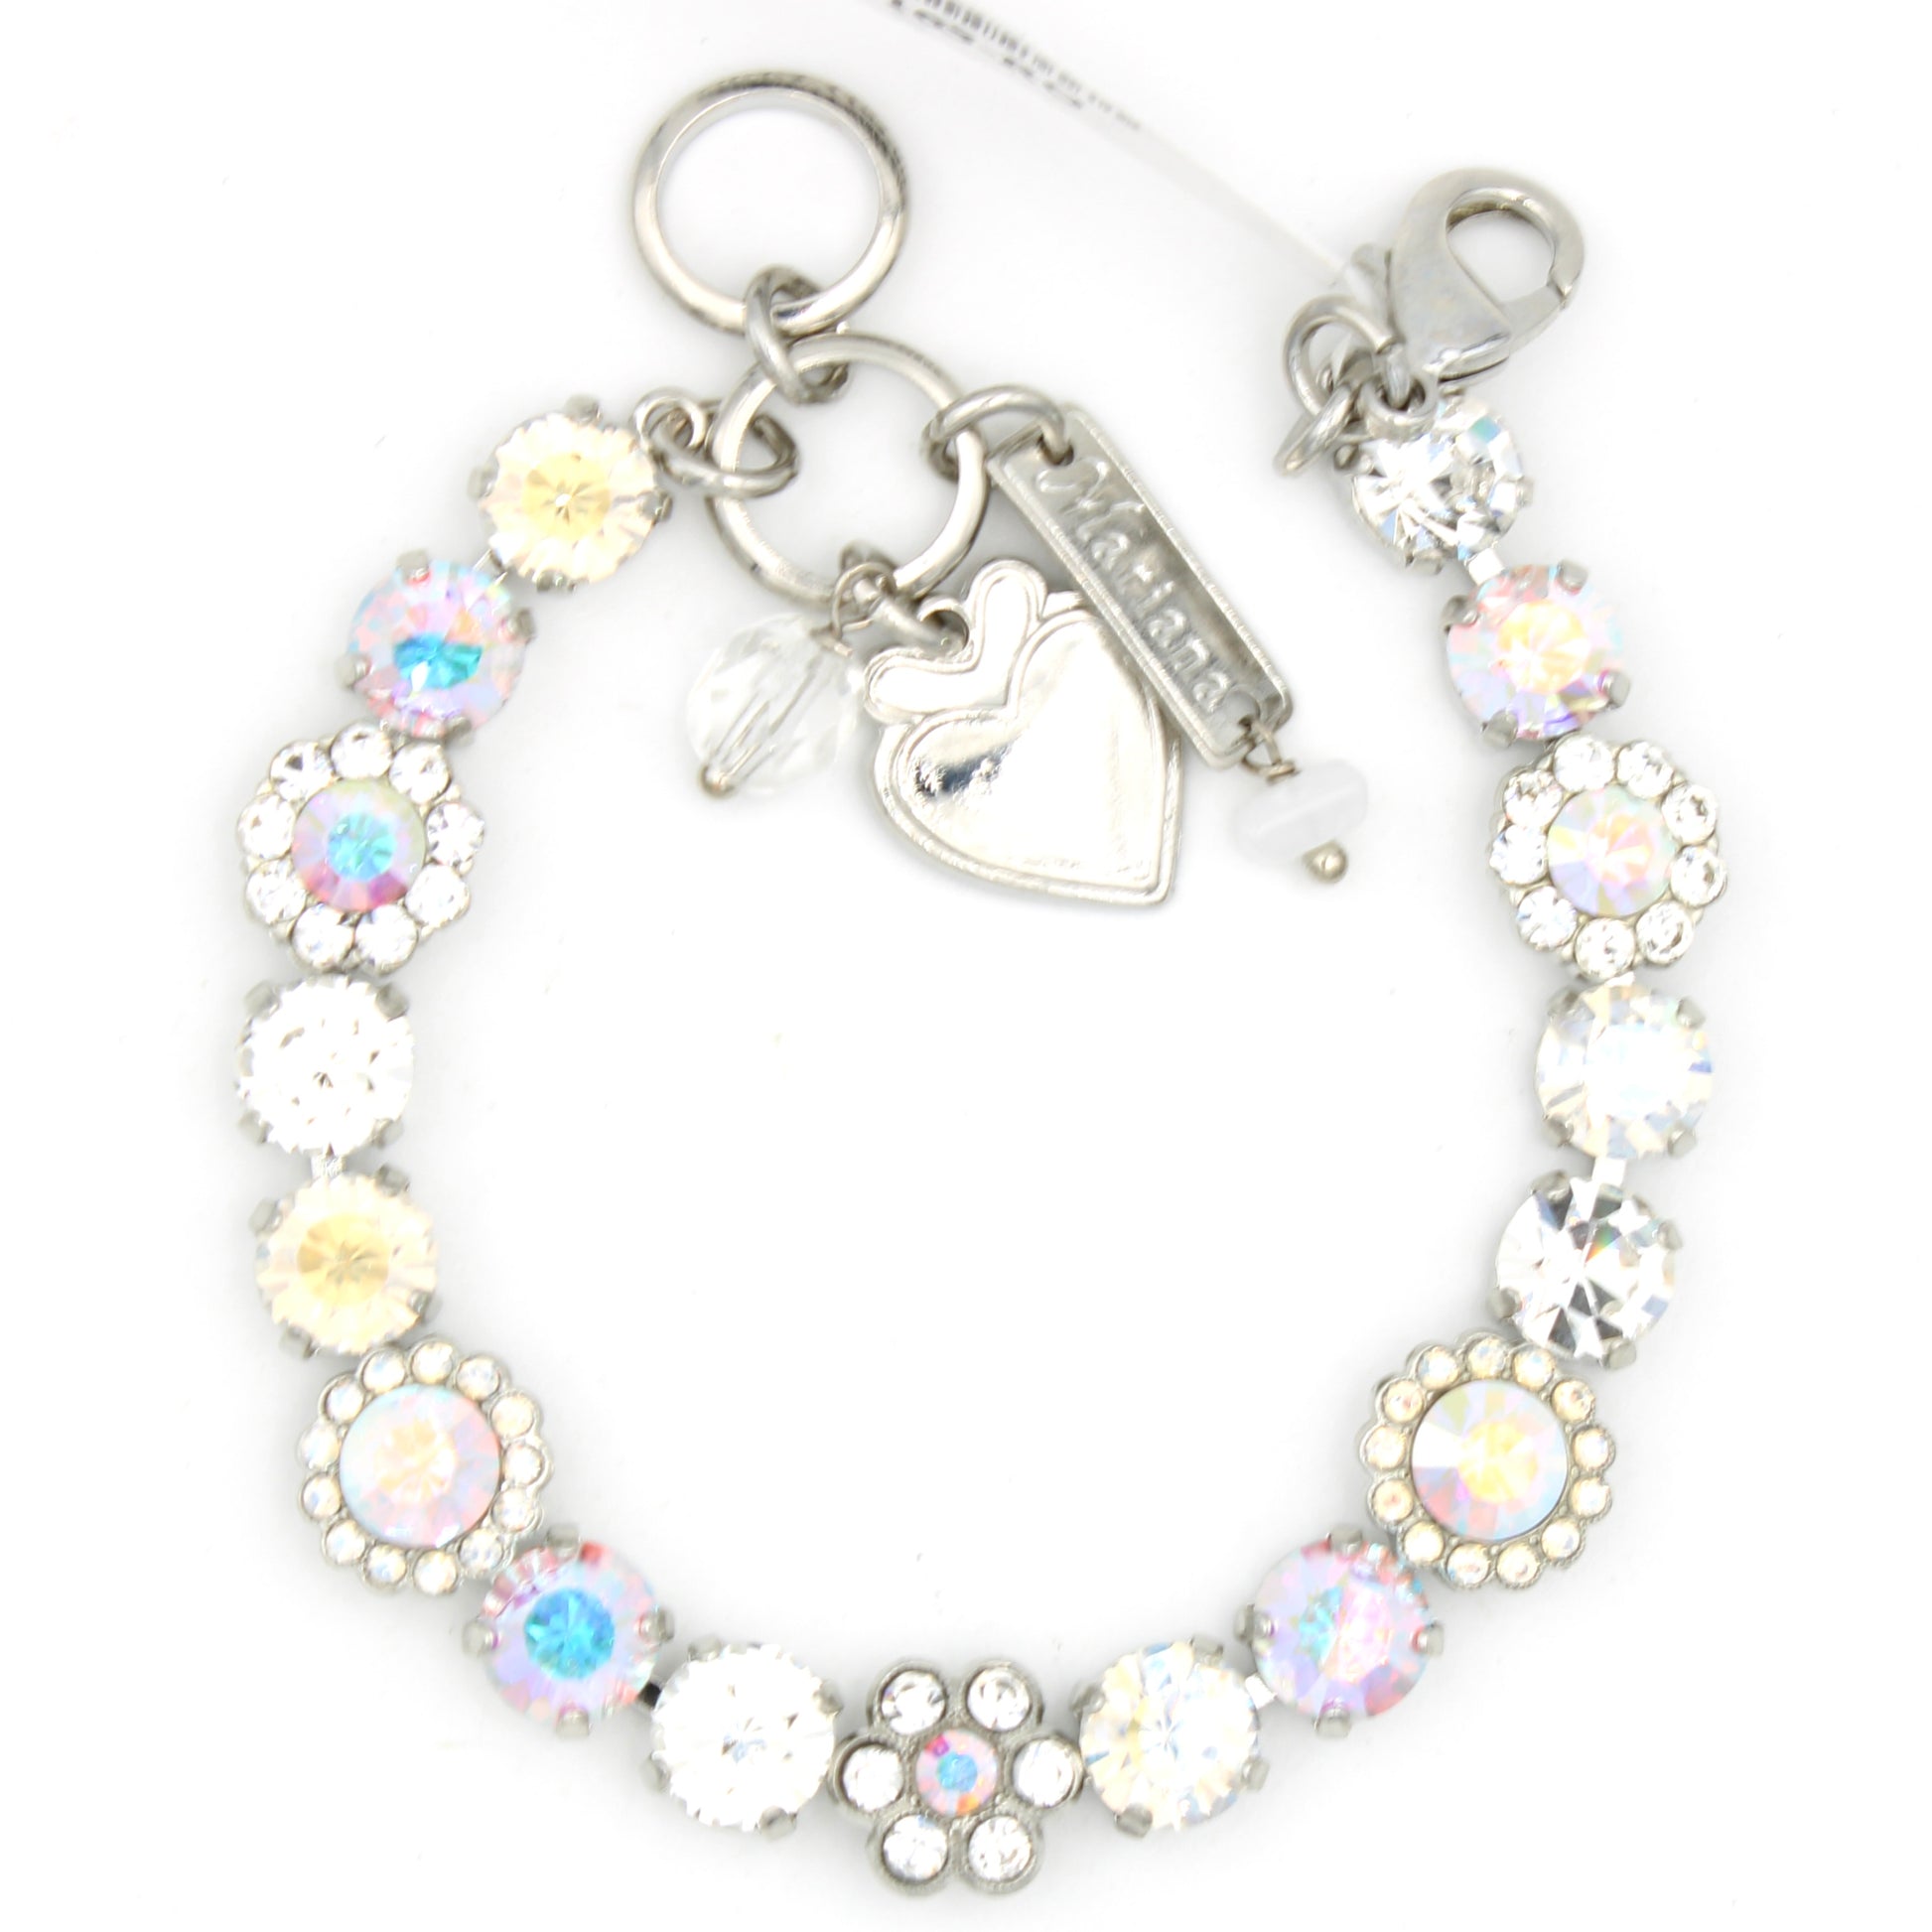 Winds of Change Collection Medium Must-Have Blossom Bracelet - MaryTyke's